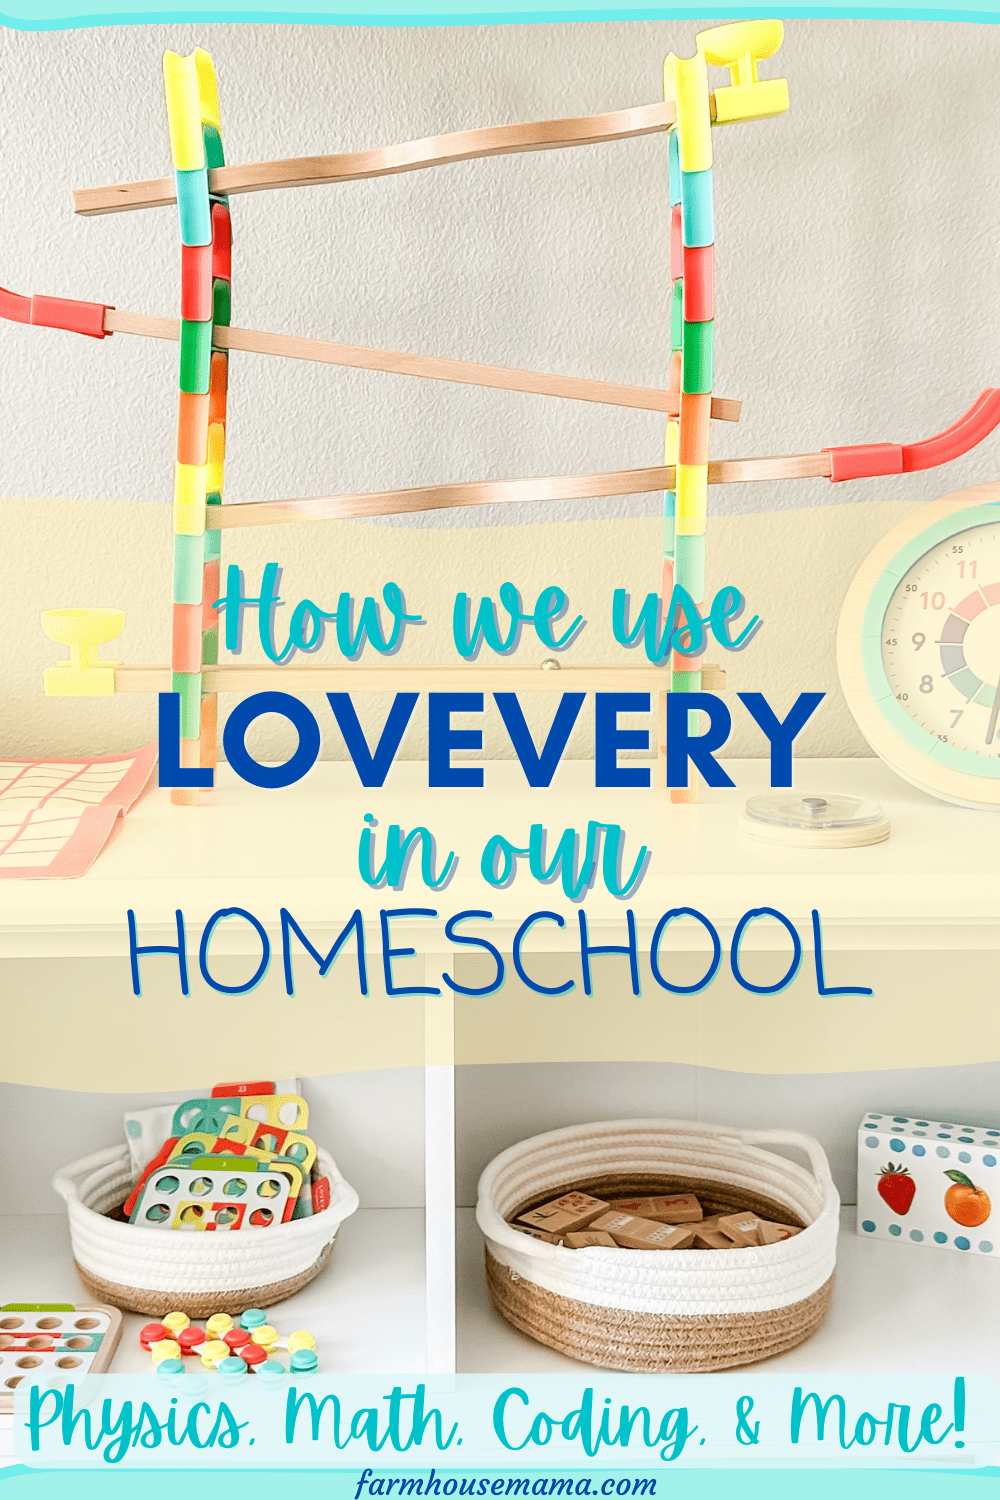 How We Use Lovevery in Our Homeschool The Planner Play Kit Lovevery Blog Review Blogger Lovevery play kits for 4 year olds stem toys math physics games learning toys learning through play